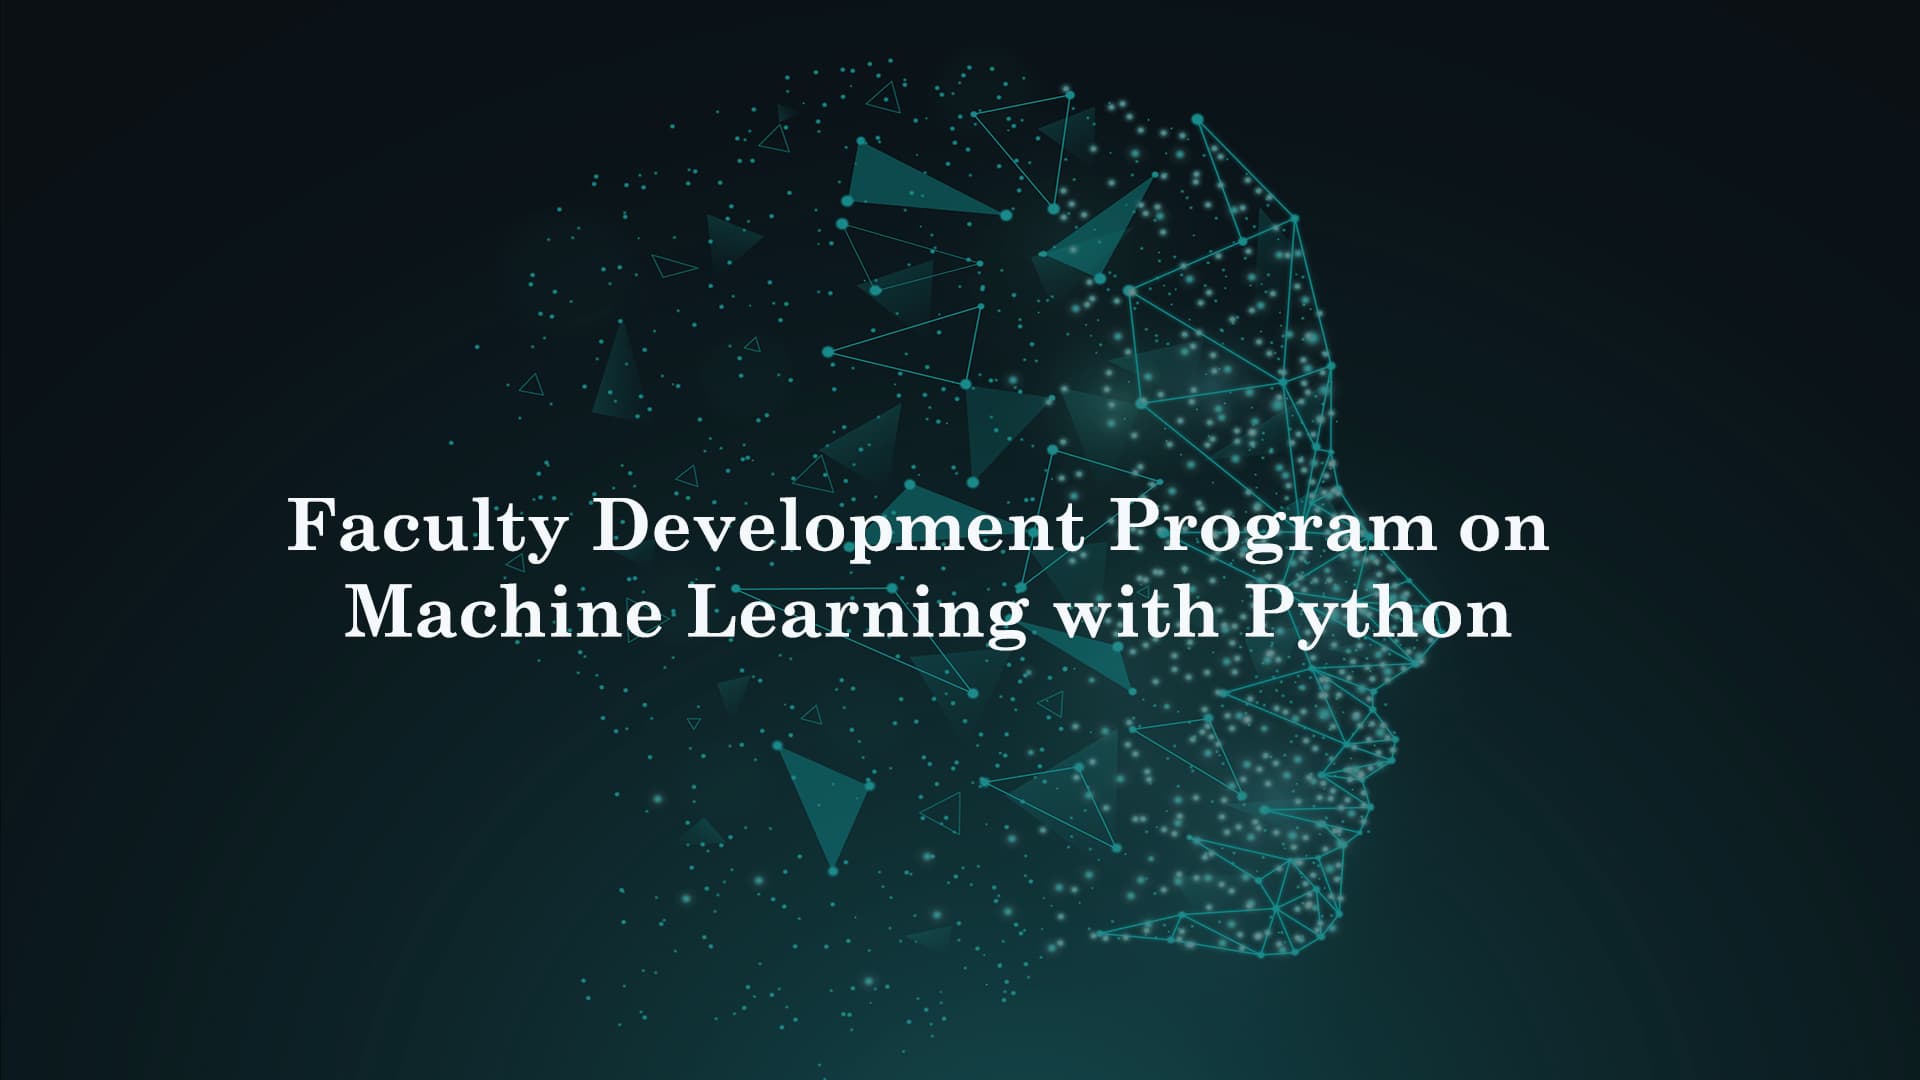 VTU Faculty Develpment Program on Machine Learning with Python